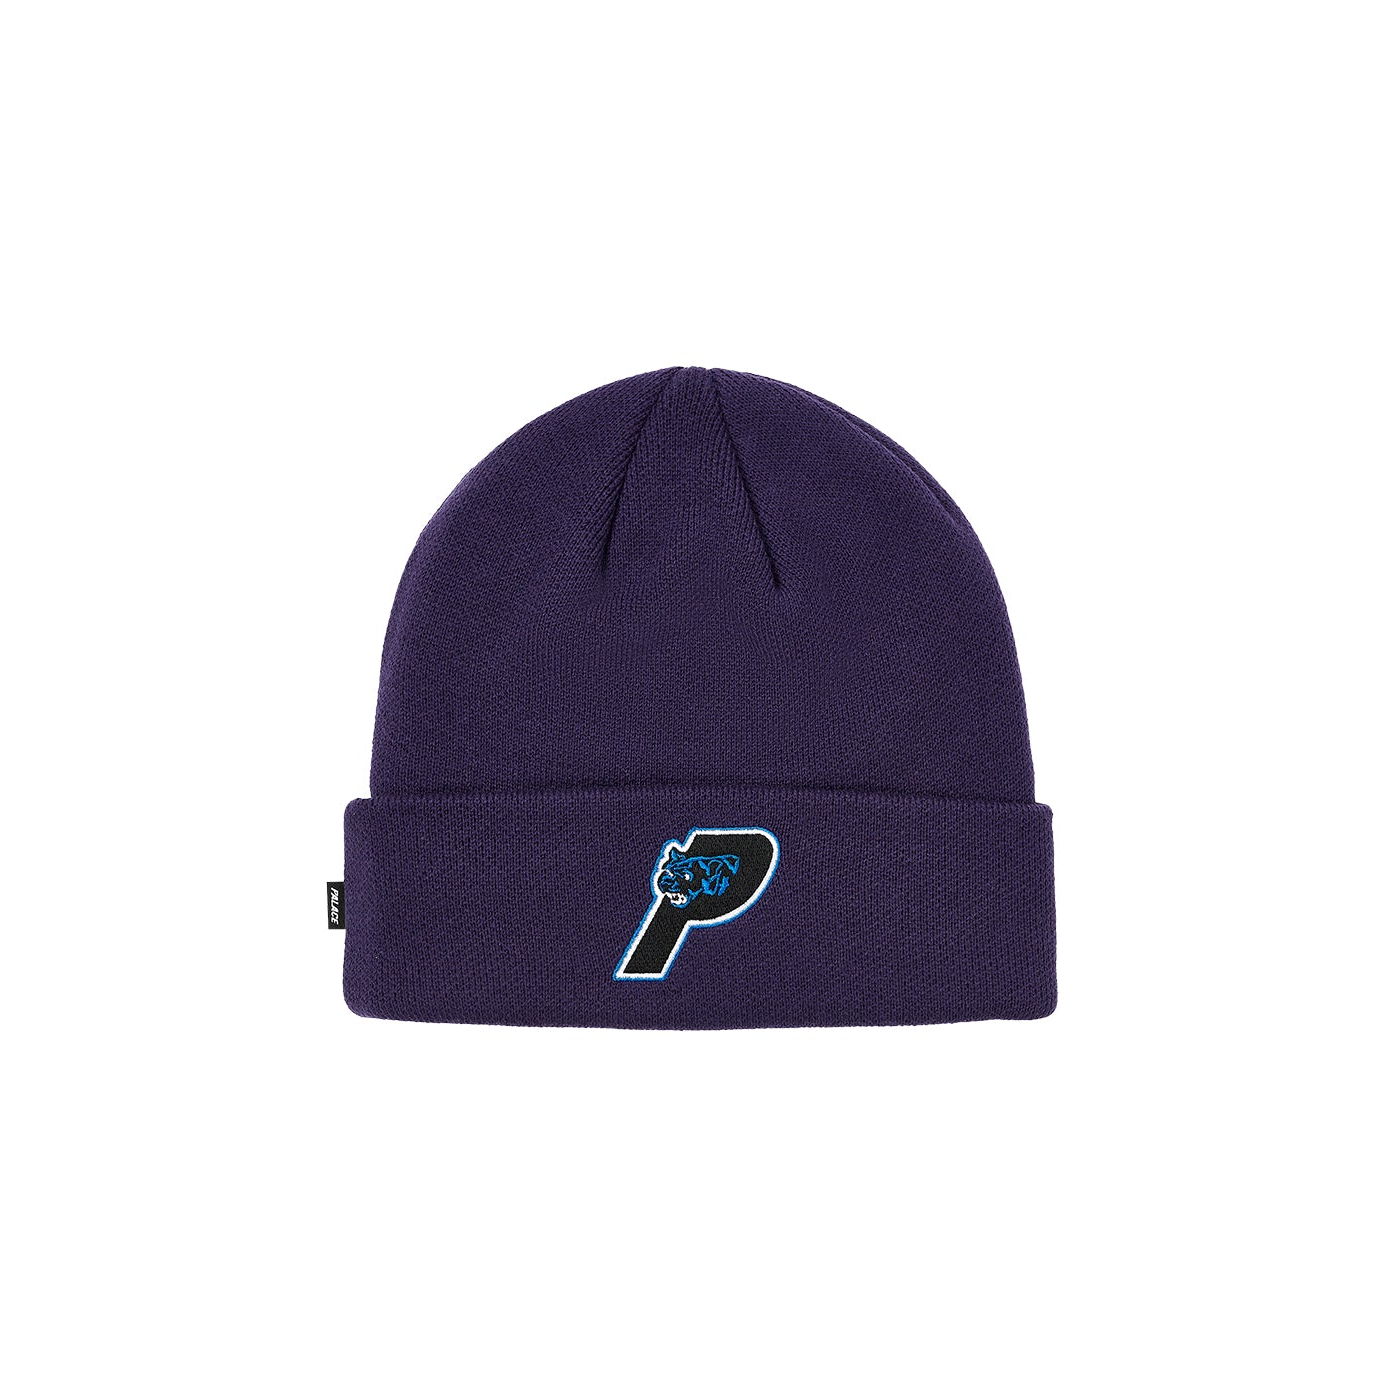 Thumbnail PANTHER BEANIE PERFECT PURPLE one color